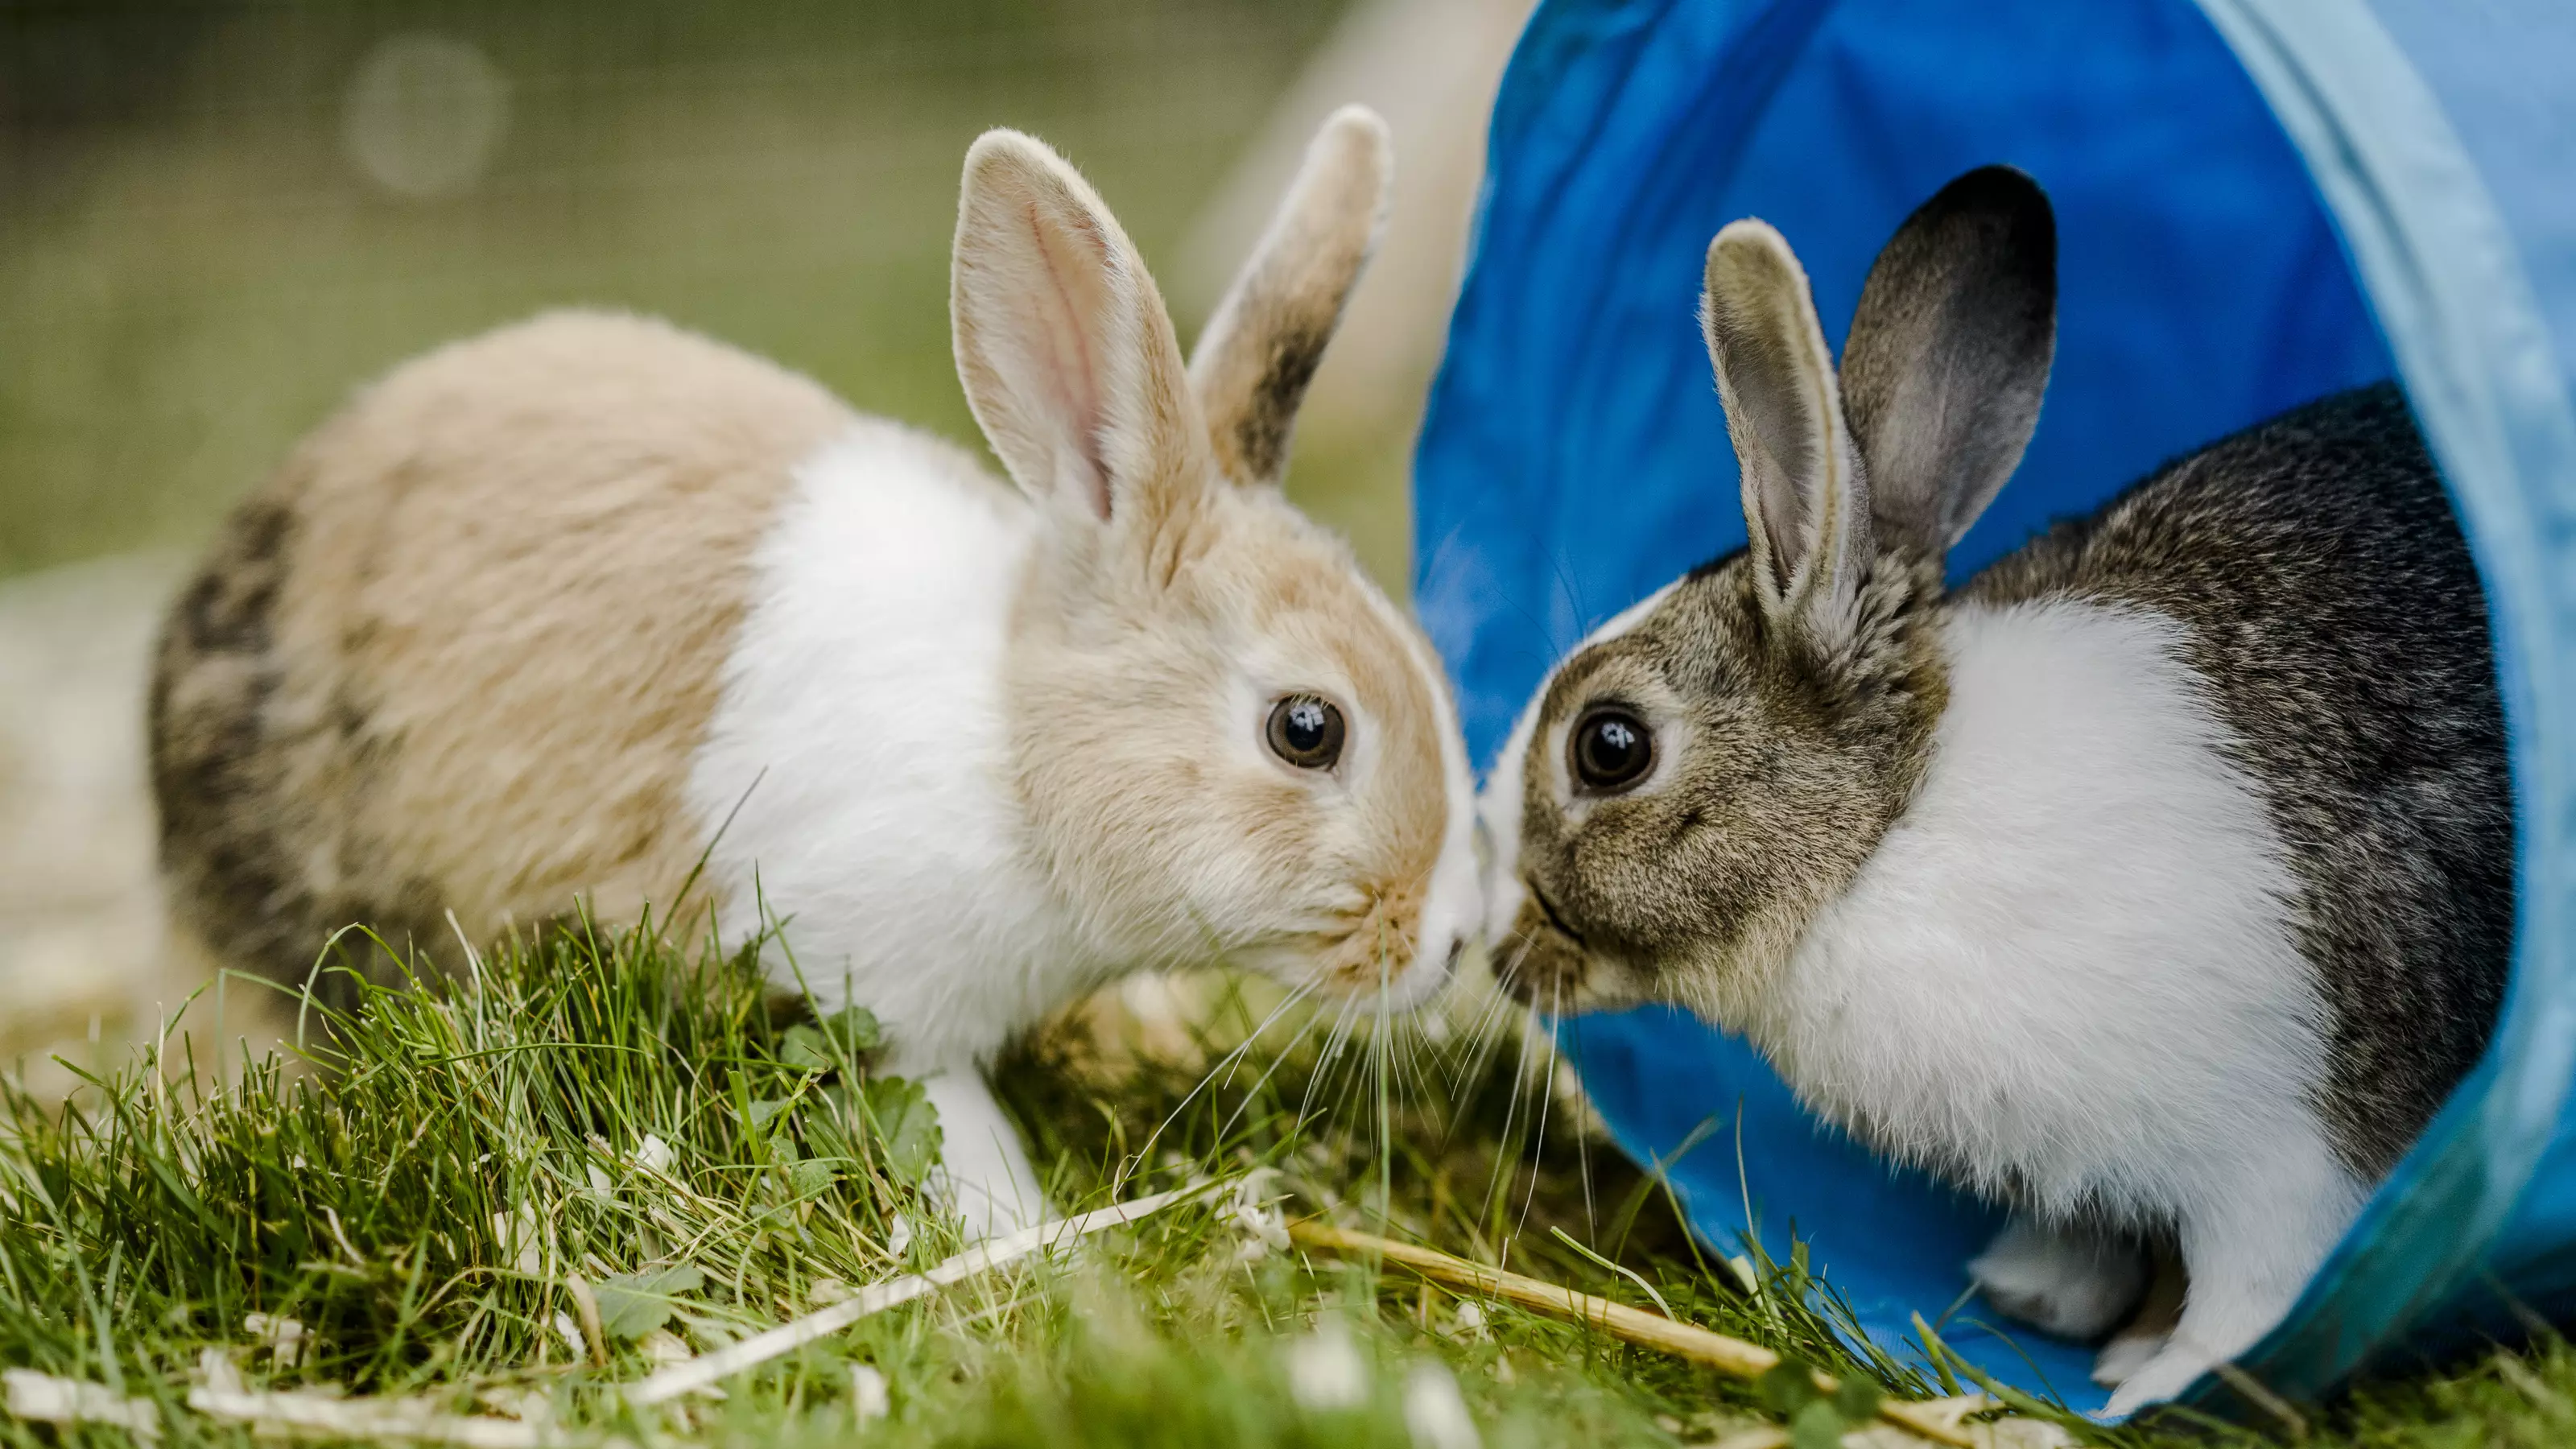 Two brown and white rabbits in a blue tunnel on a grassy garden 